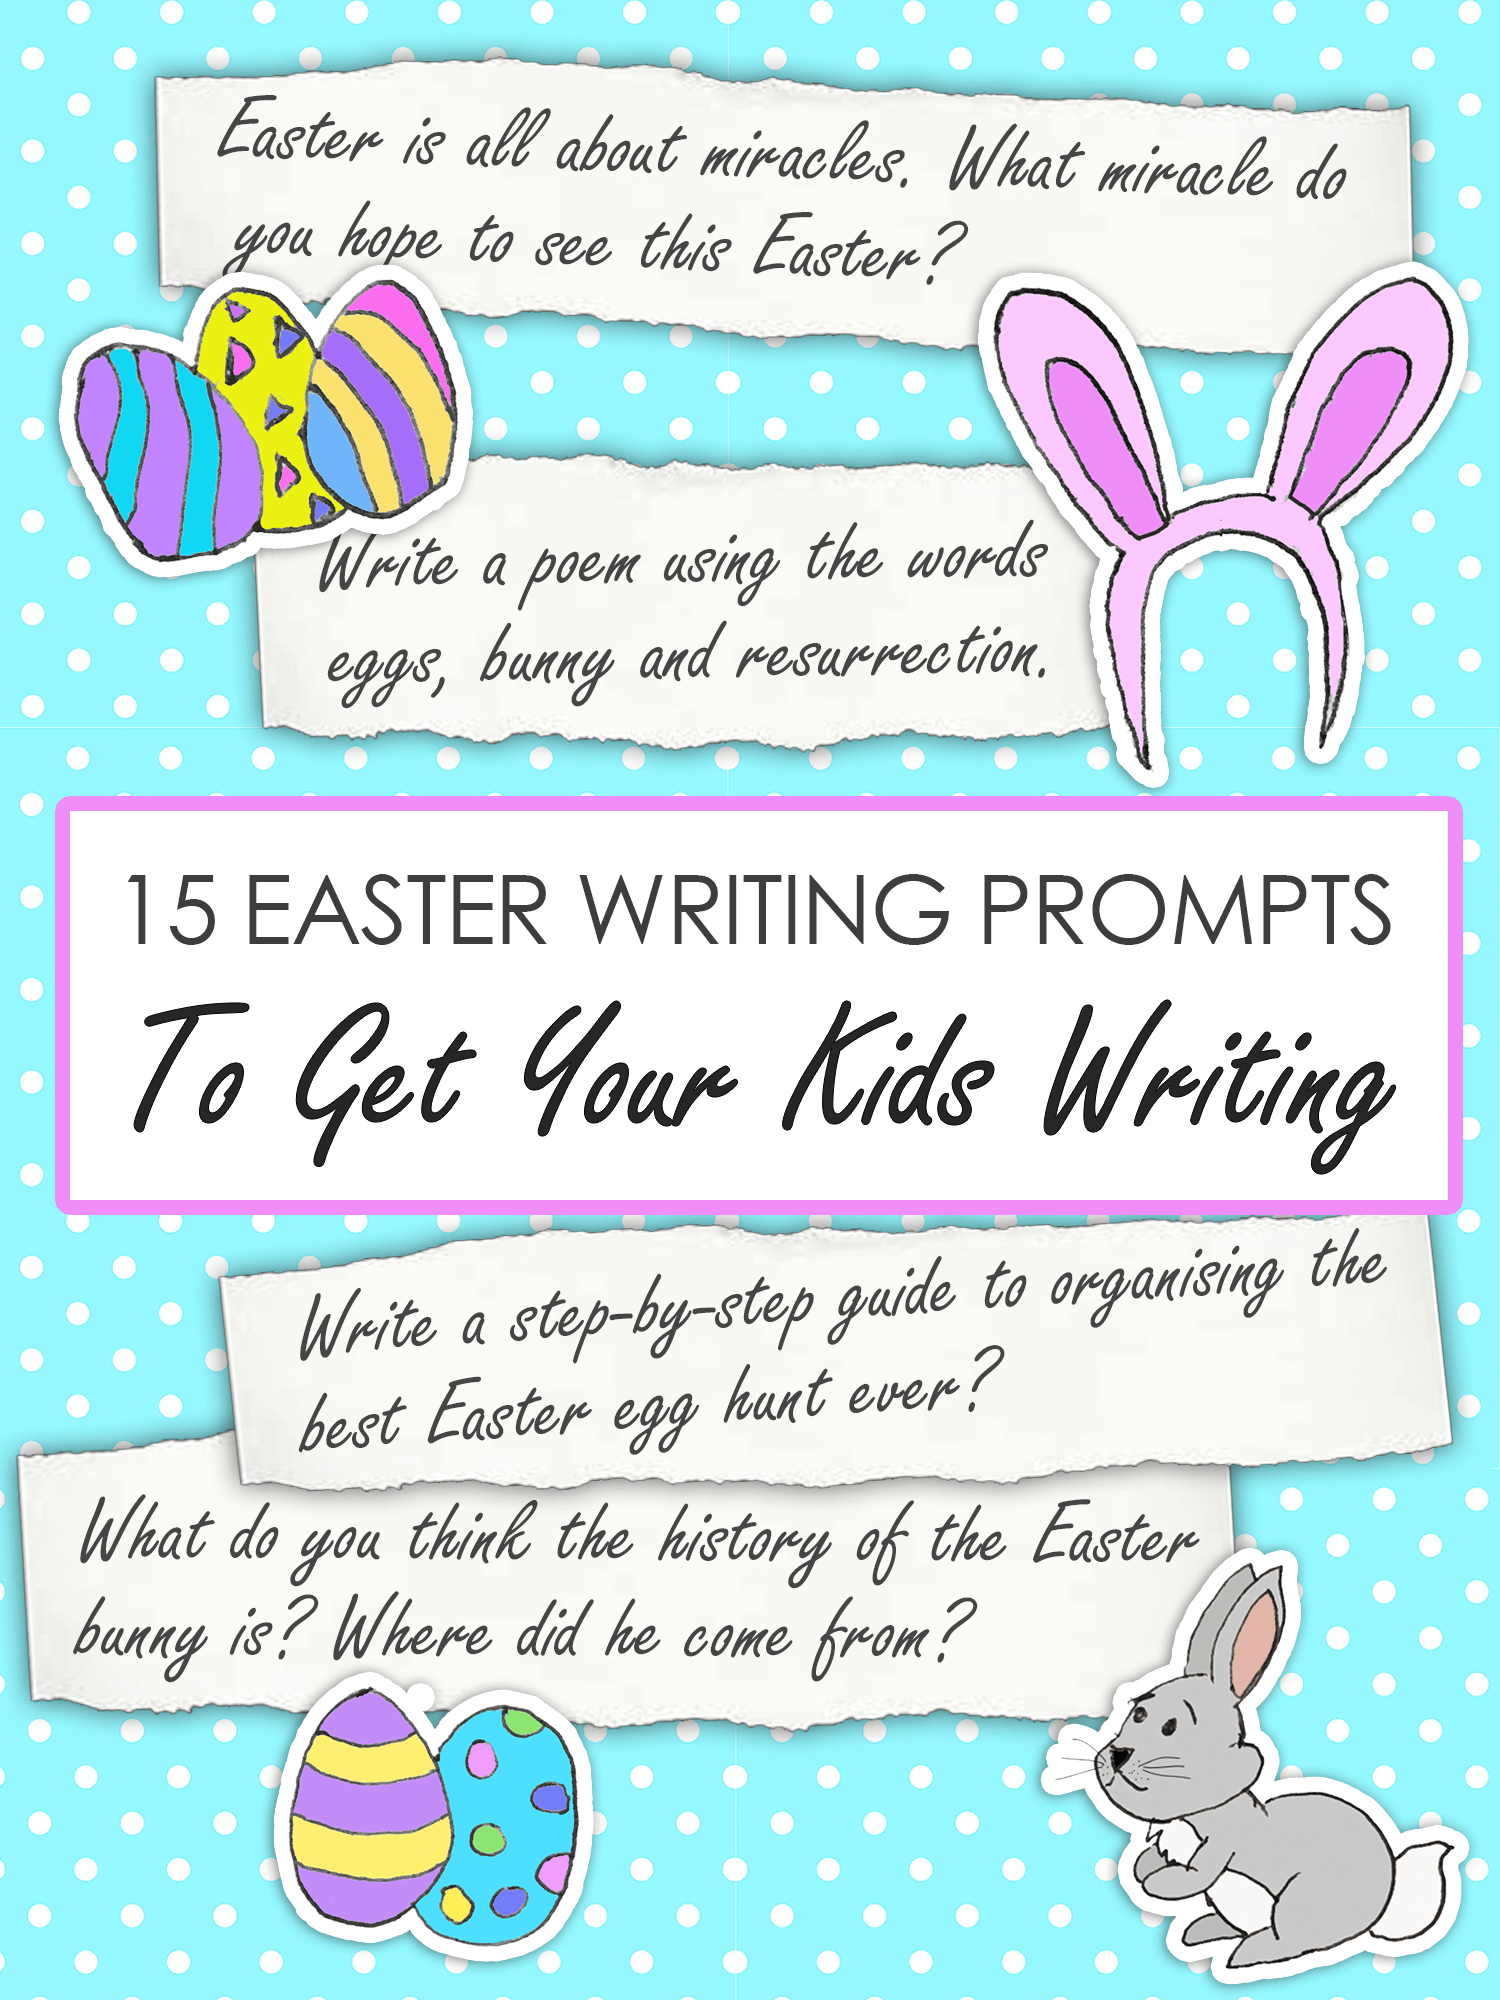 15 Easter Writing Prompts to Get Your Kids Writing imagine forest